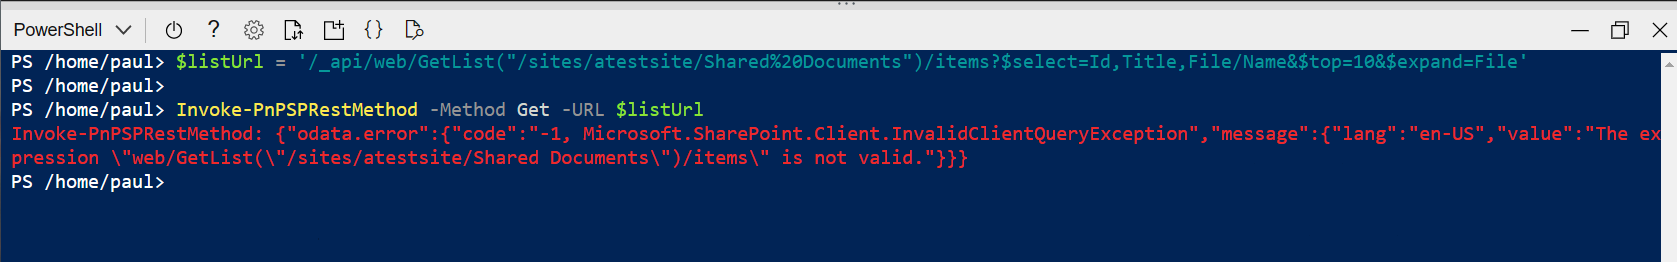 Screenshot of the output of Azure Shell with a malformed url with apostrophies